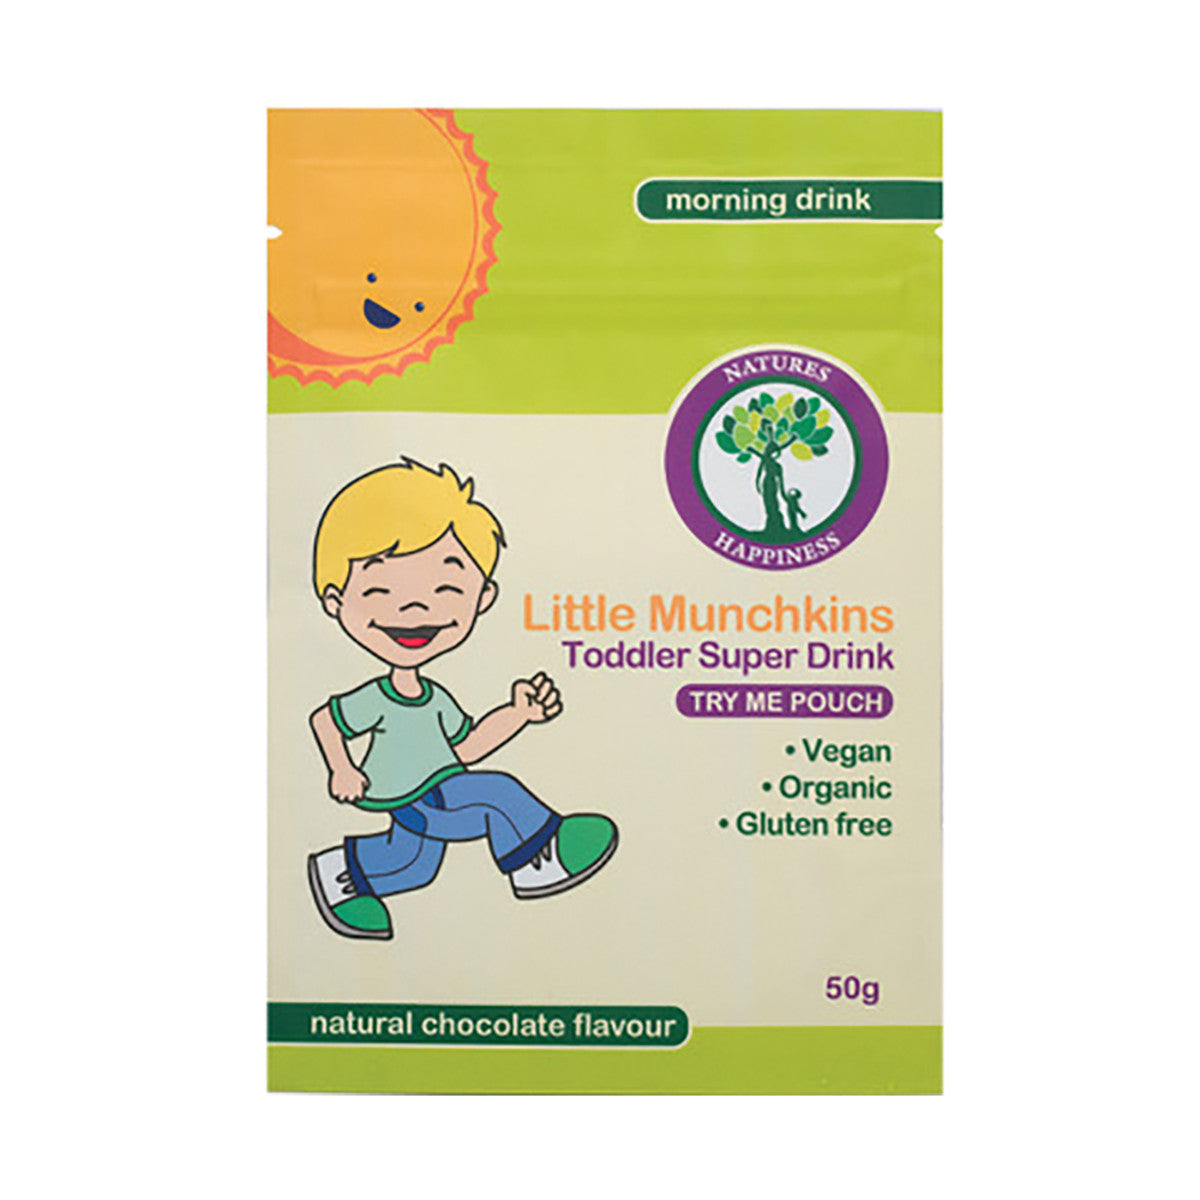 Nat Happiness Lit Munchkins Toddler Drink Morn Choc Pouch 50g